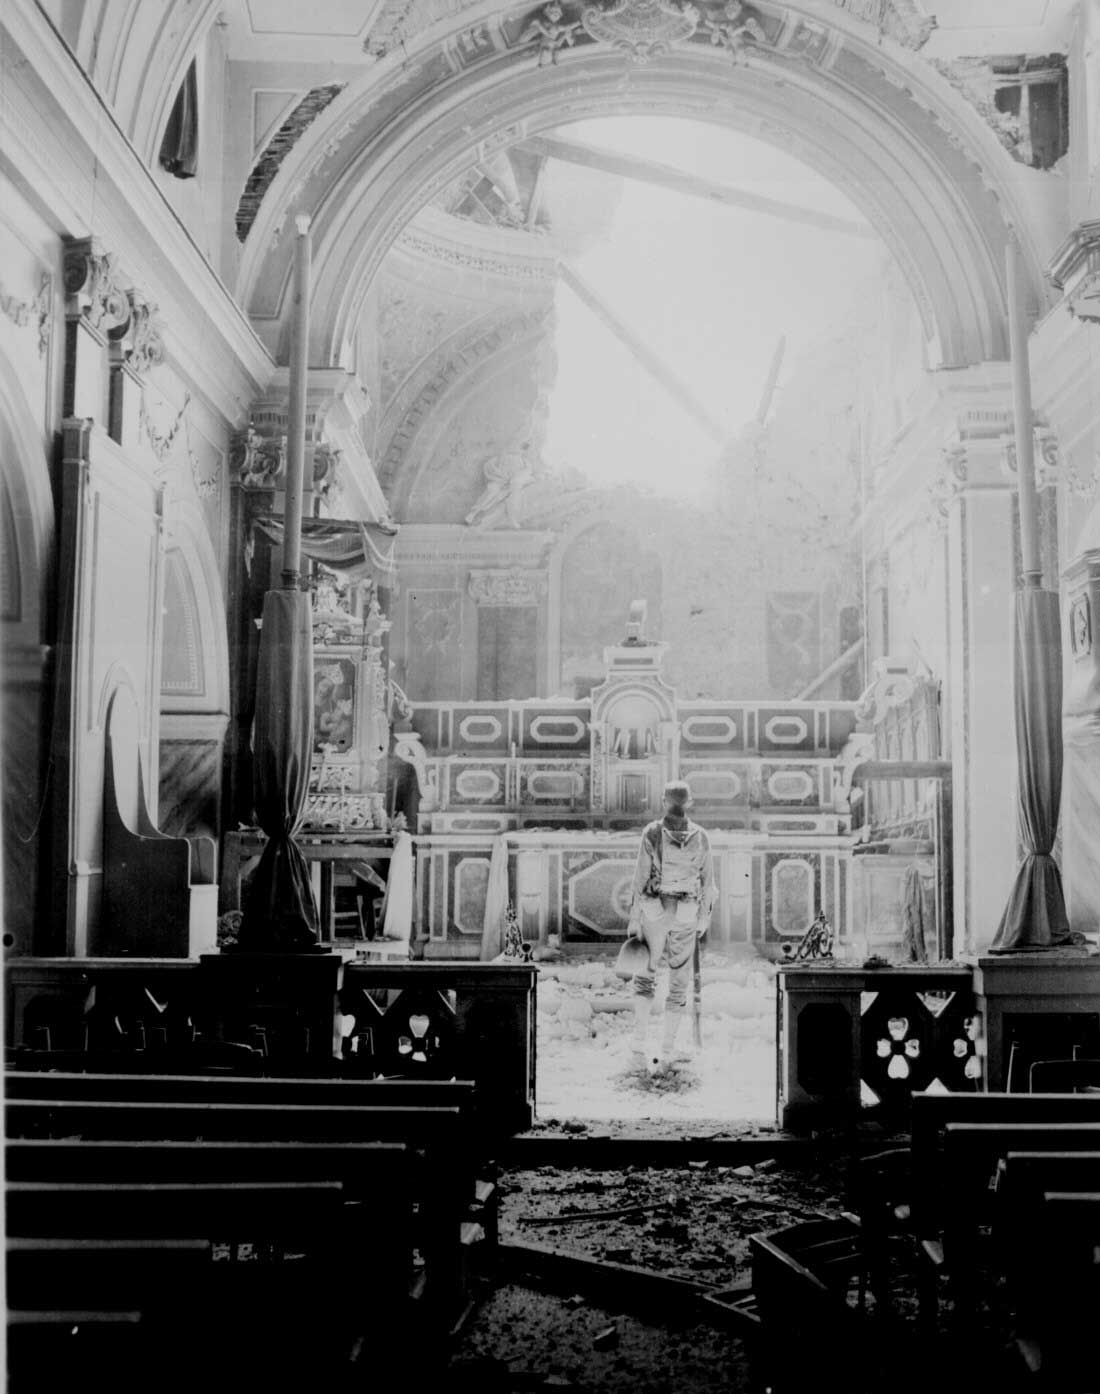 Private Paul Oglesby of US 30th Infantry Regiment standing before an altar in a damaged Catholic Church at Acerno, Italy, 23 Sep 1943